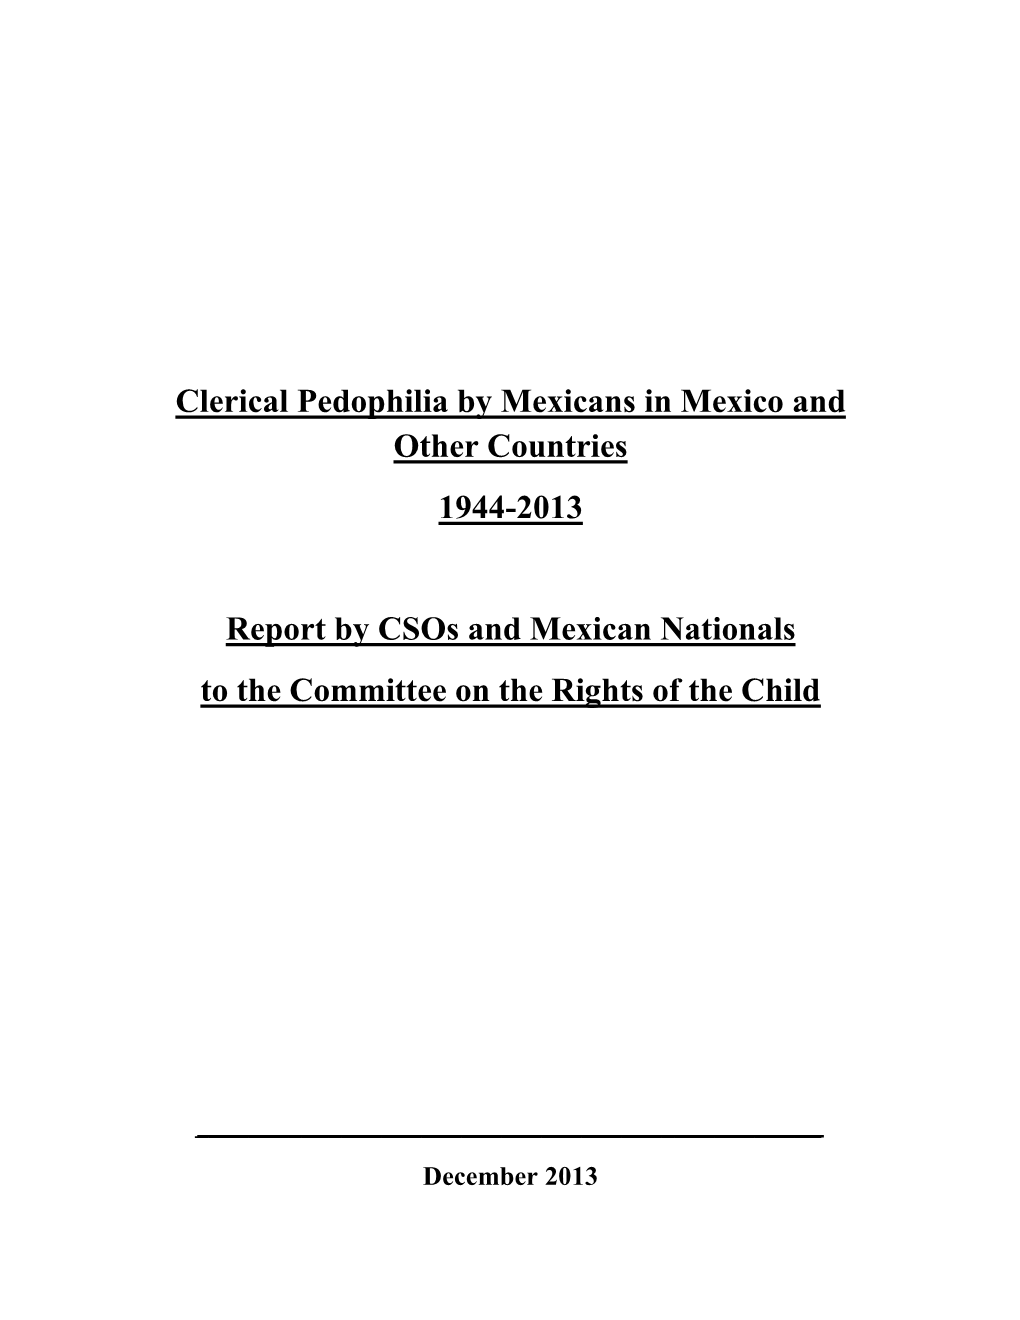 Clerical Pedophilia by Mexicans in Mexico and Other Countries 1944-2013